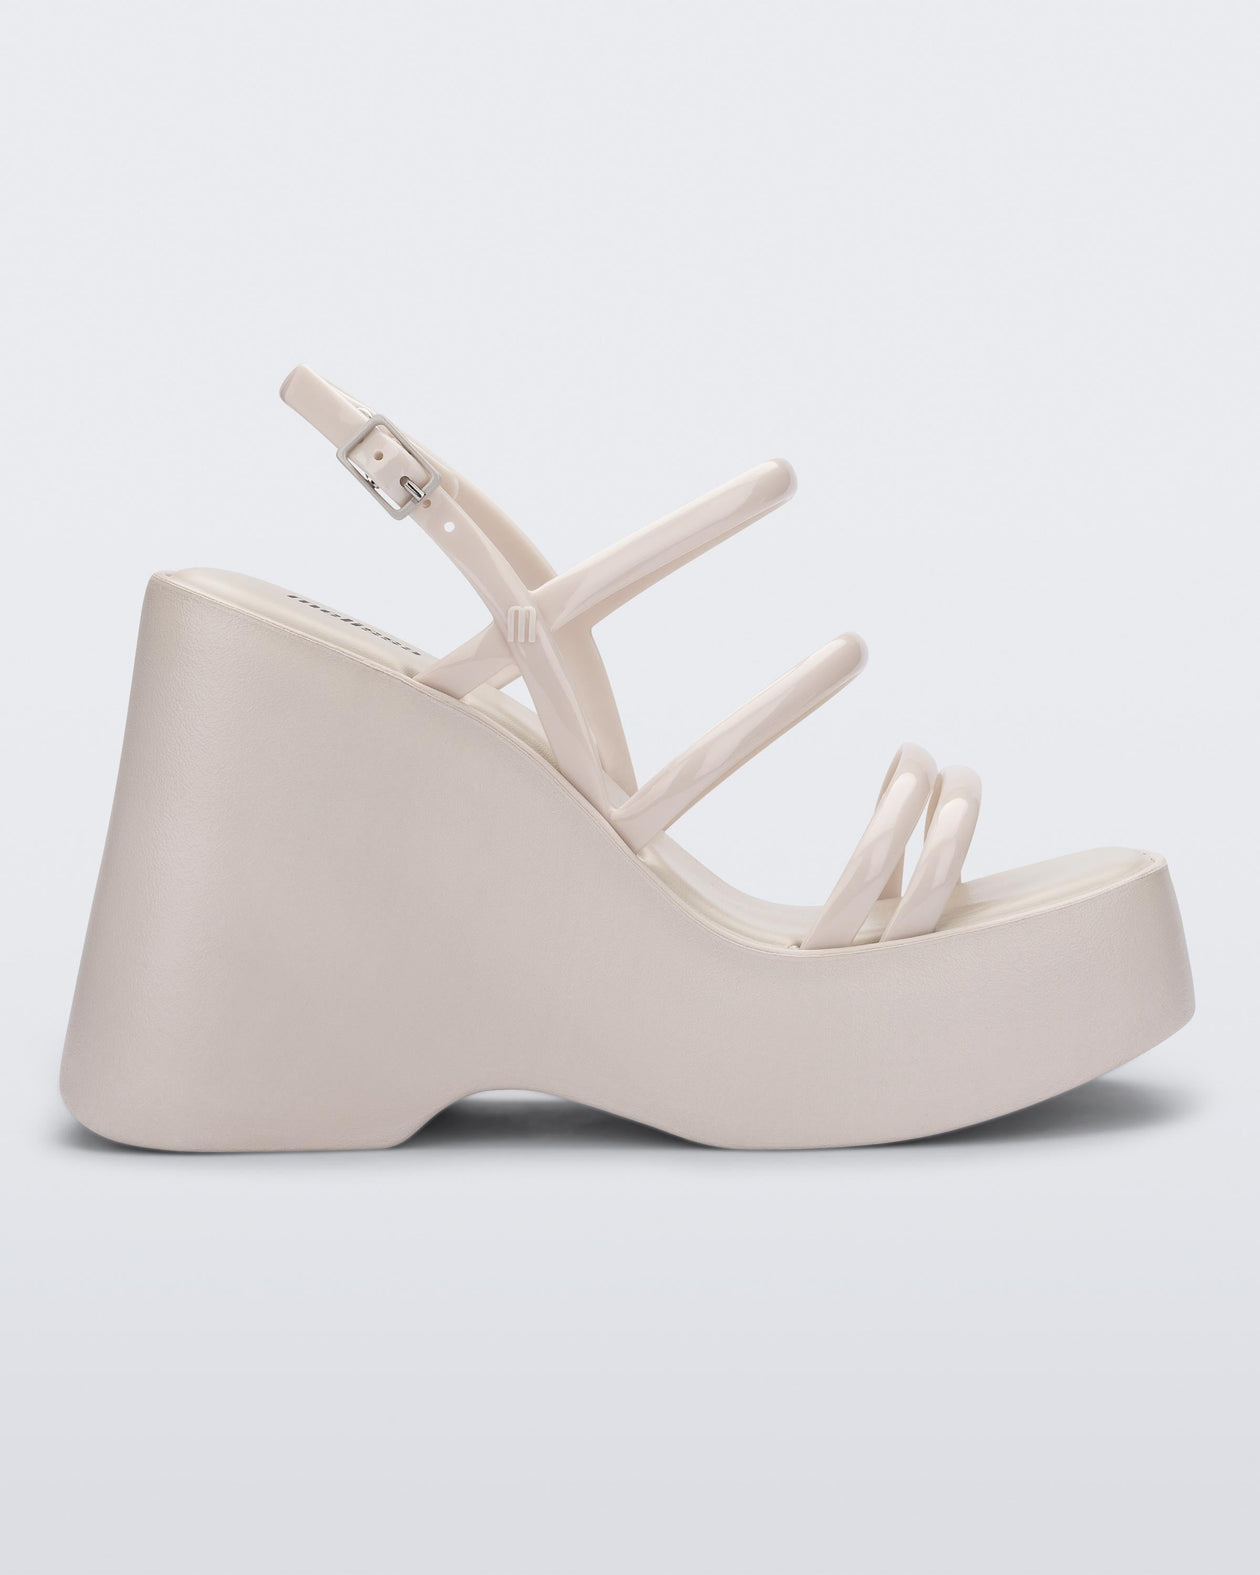 Side view of a white Jessie platform wedge sandal with side buckle ankle strap